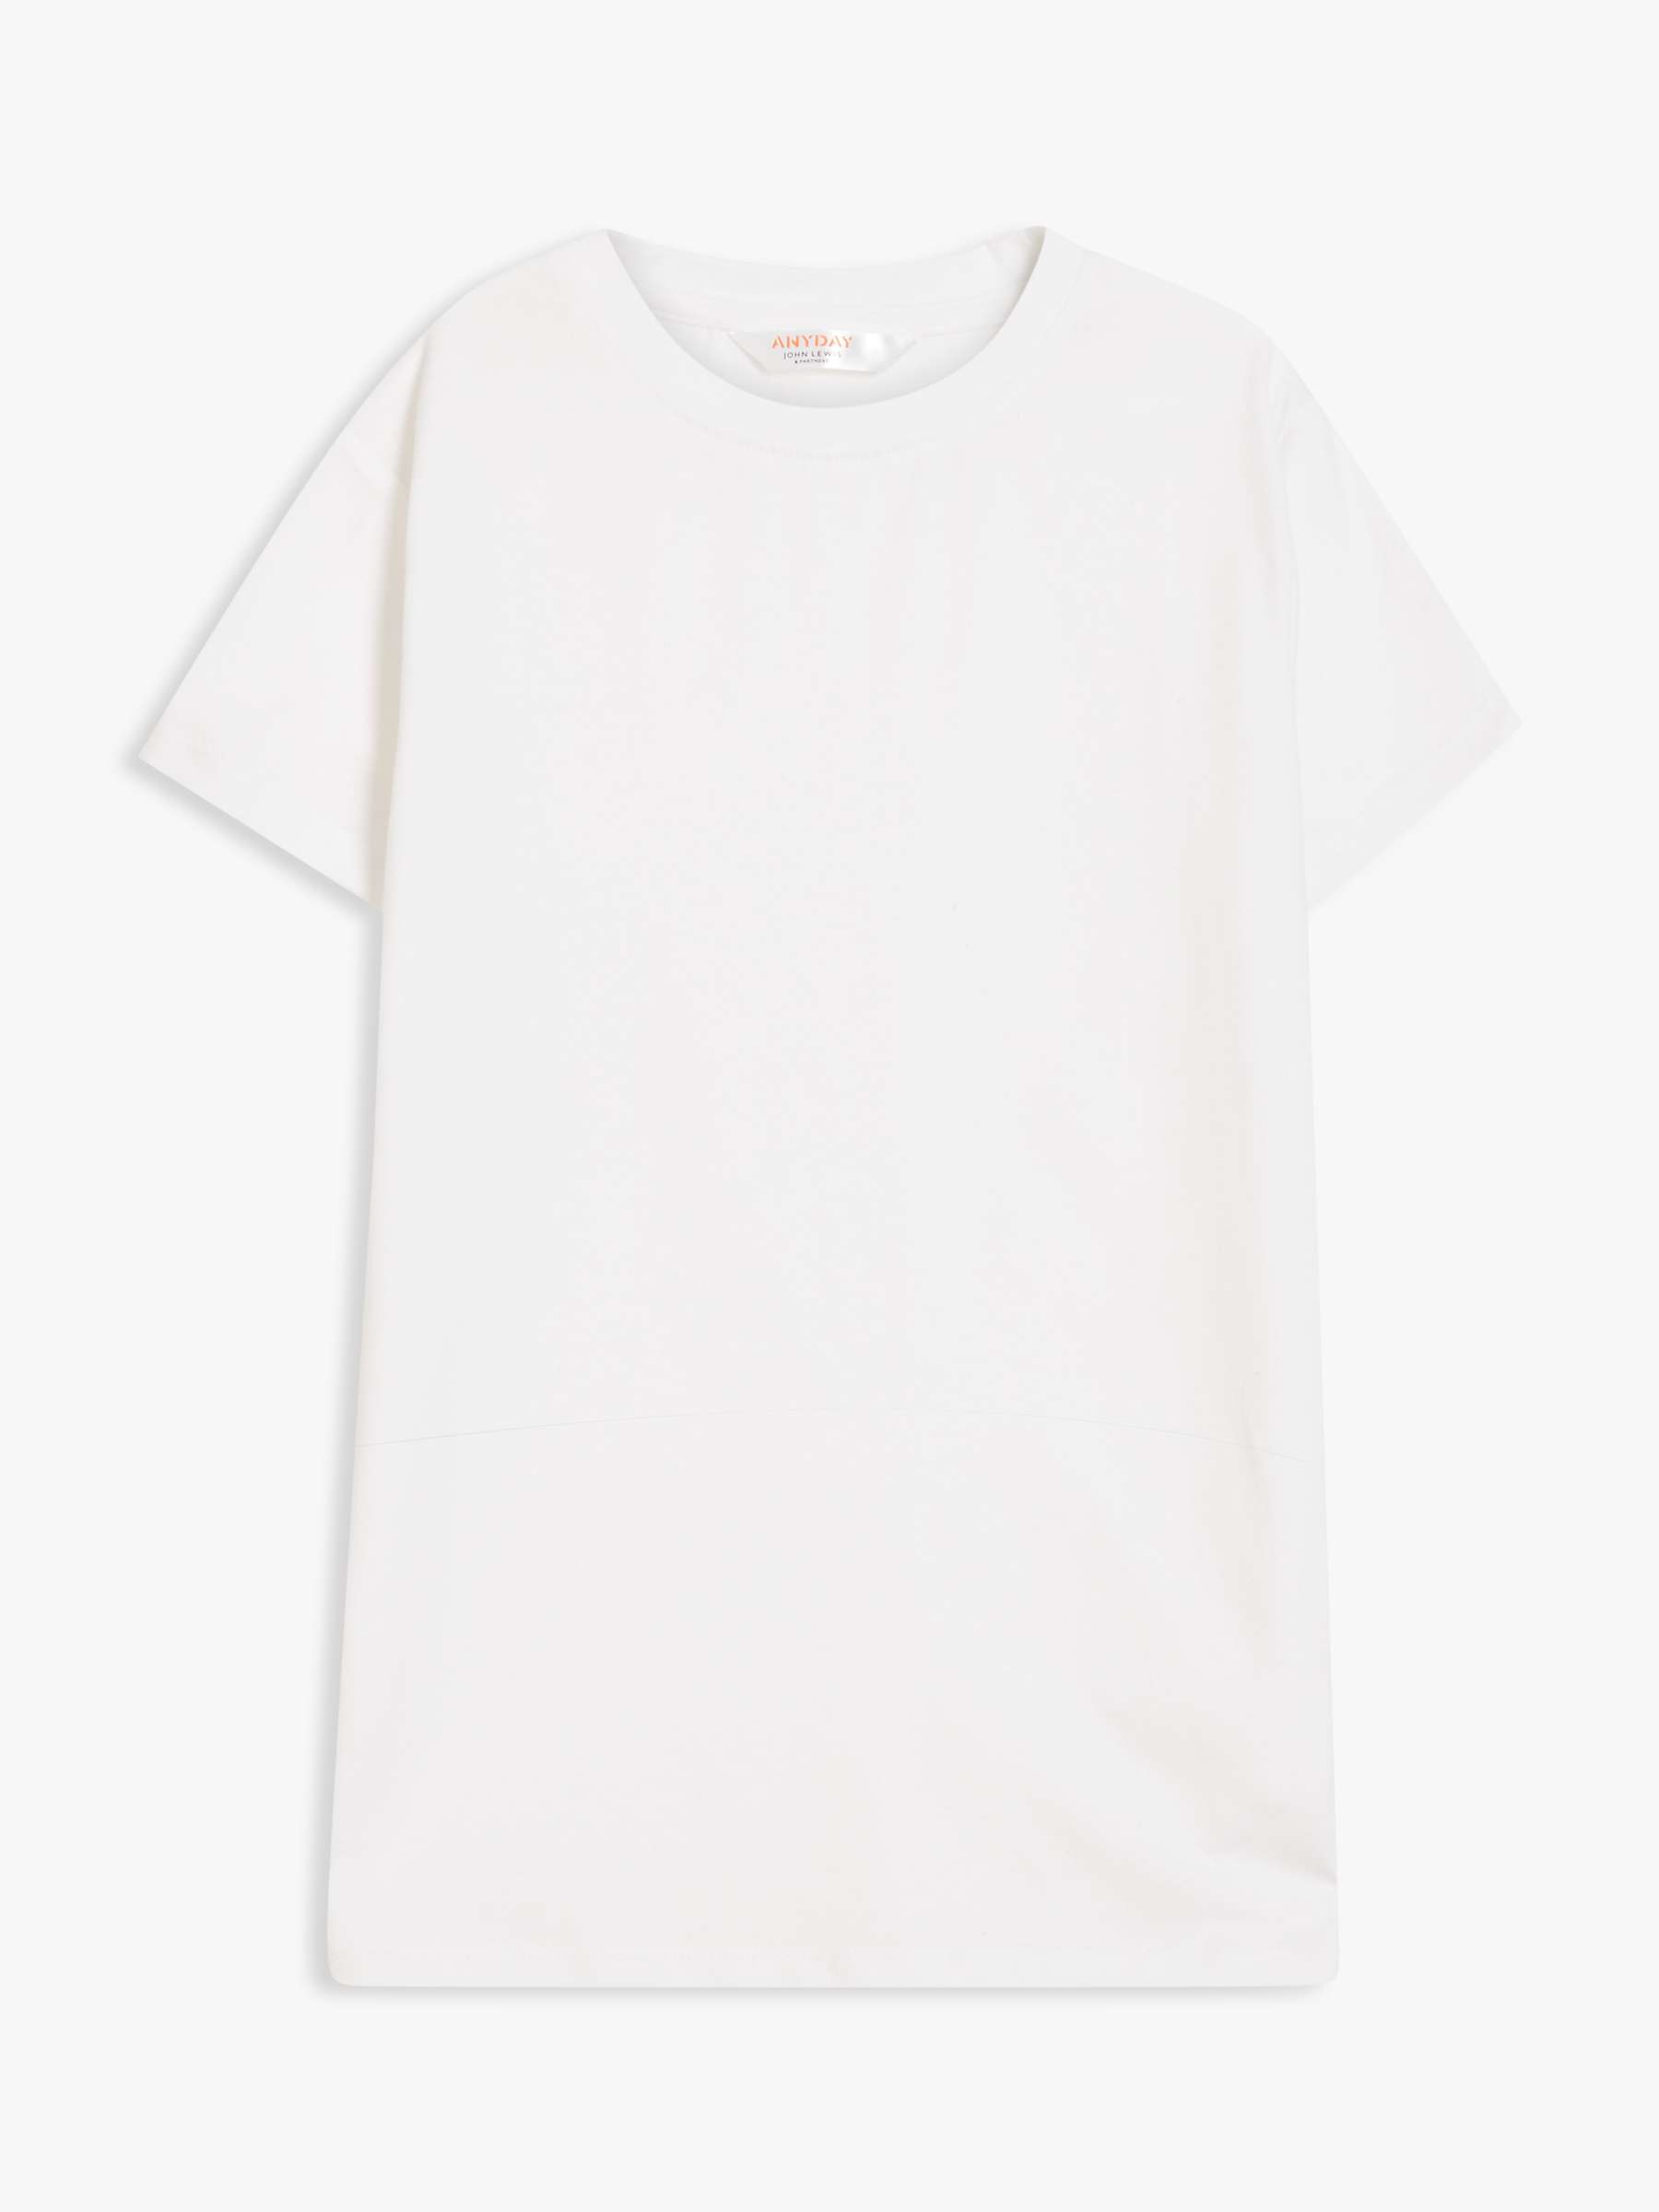 Buy John Lewis ANYDAY School T-Shirts, Pack of 2, White Online at johnlewis.com